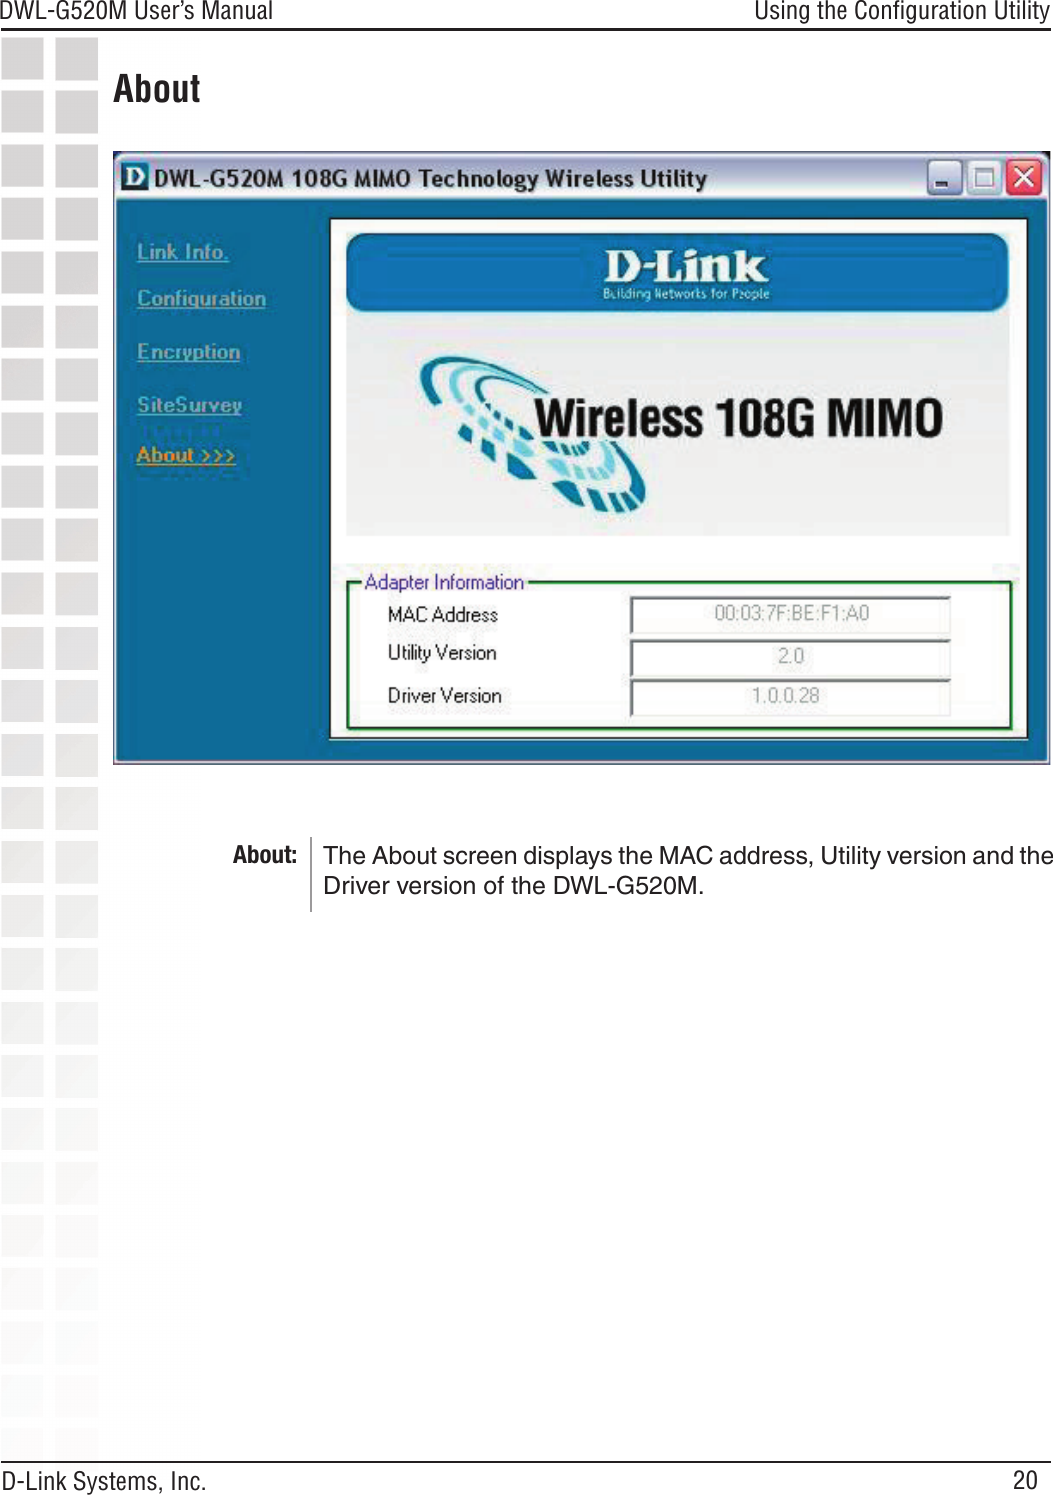 20DWL-G520M User’s Manual D-Link Systems, Inc.Using the Conﬁguration UtilityAboutAbout: The About screen displays the MAC address, Utility version and the Driver version of the DWL-G520M.